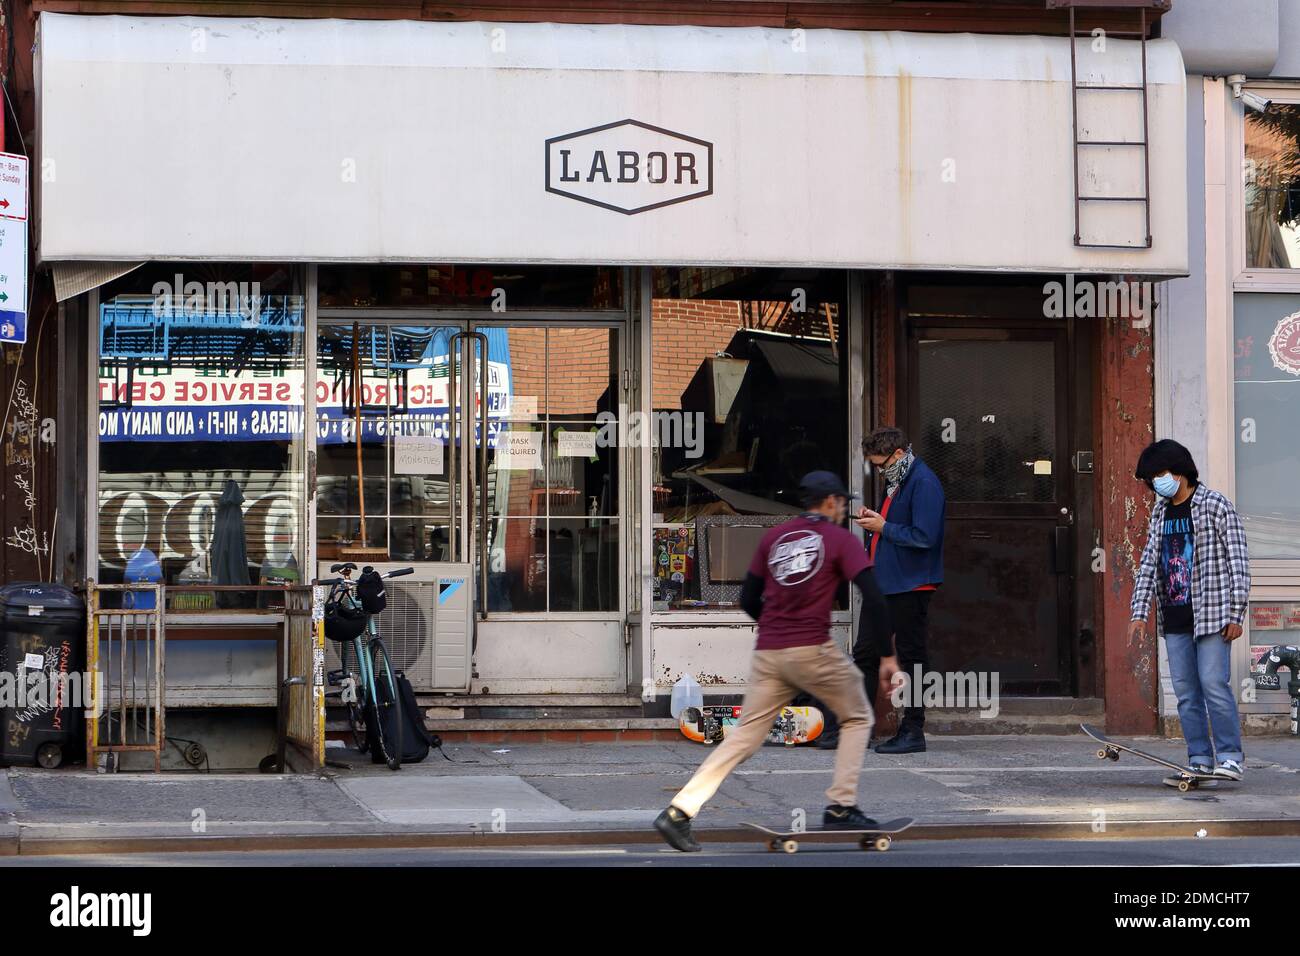 Labor Skateboard Shop, 46 Canal St, New York. exterior storefront of a skateboard shop in Manhattan's 'Dimes Square' Chinatown/Lower East Side Stock Photo